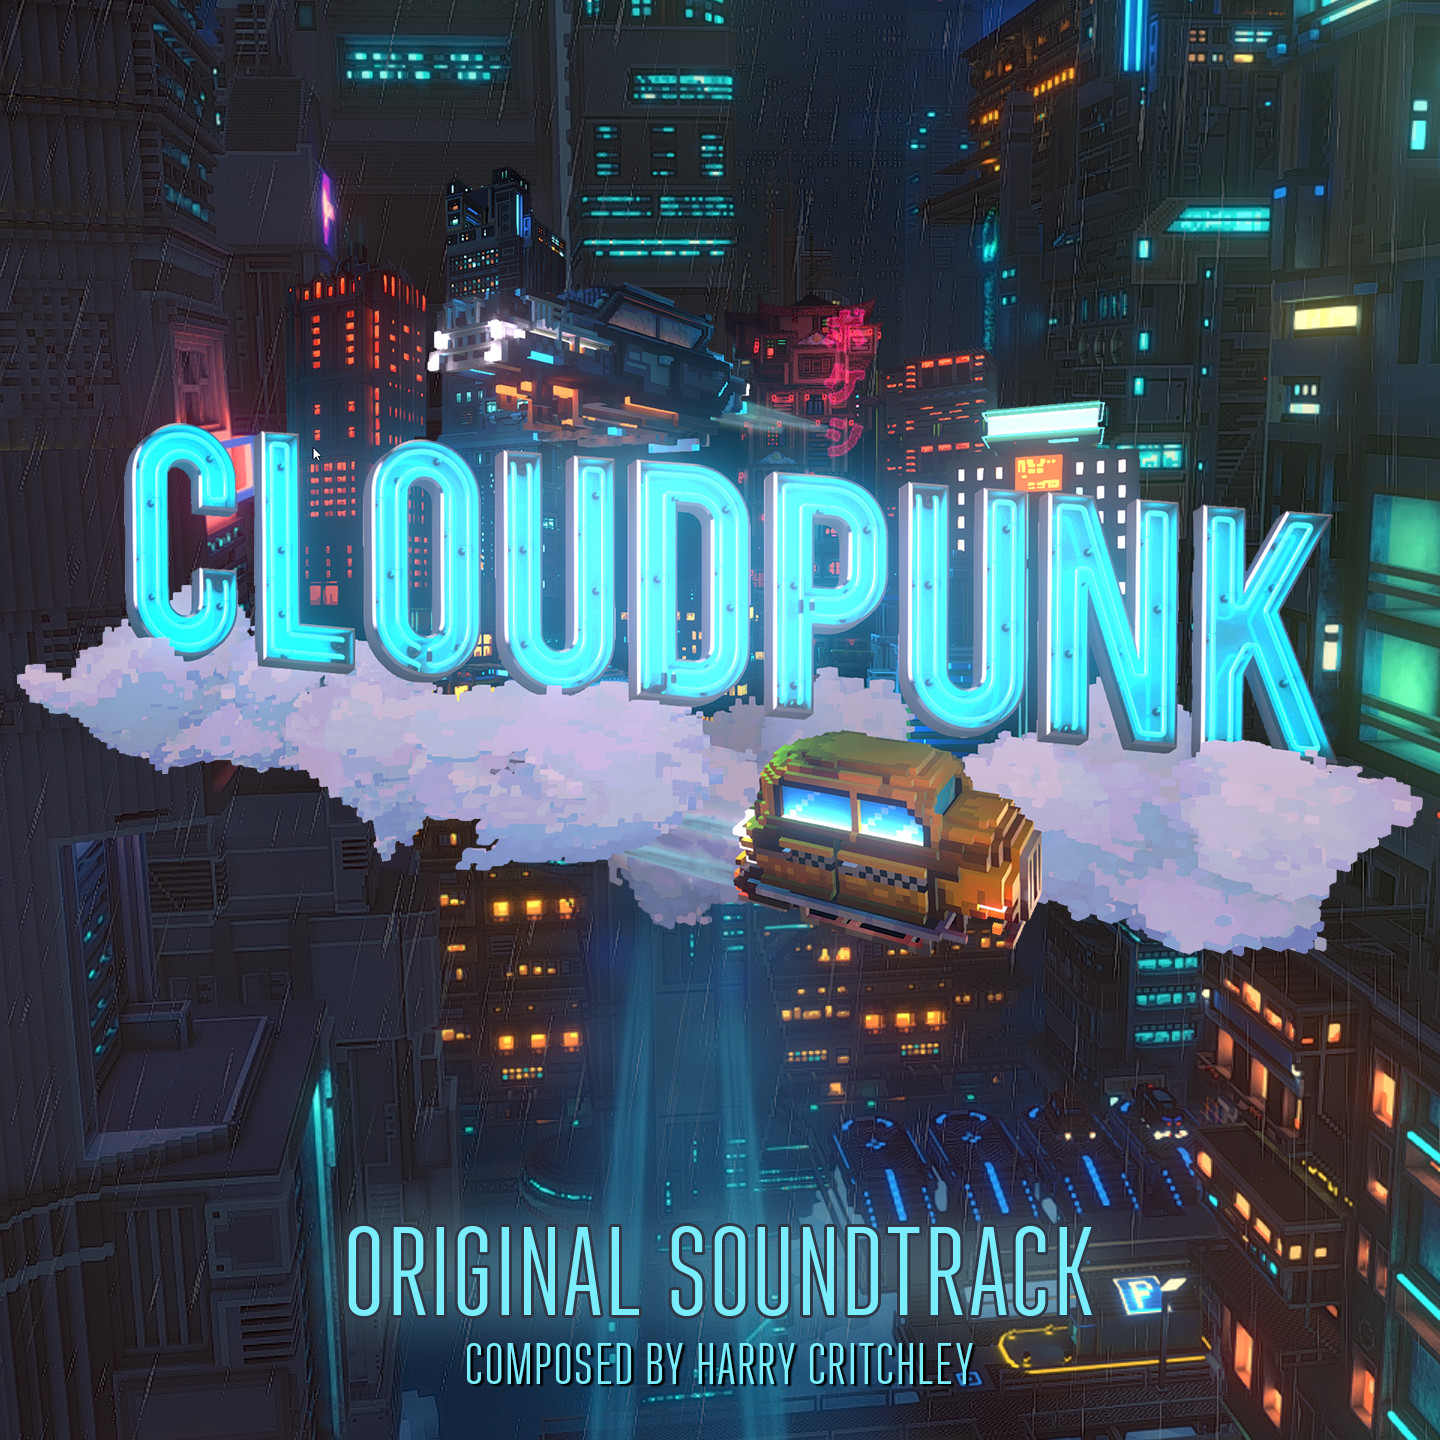 cloudpunk city of ghosts ps4 release date